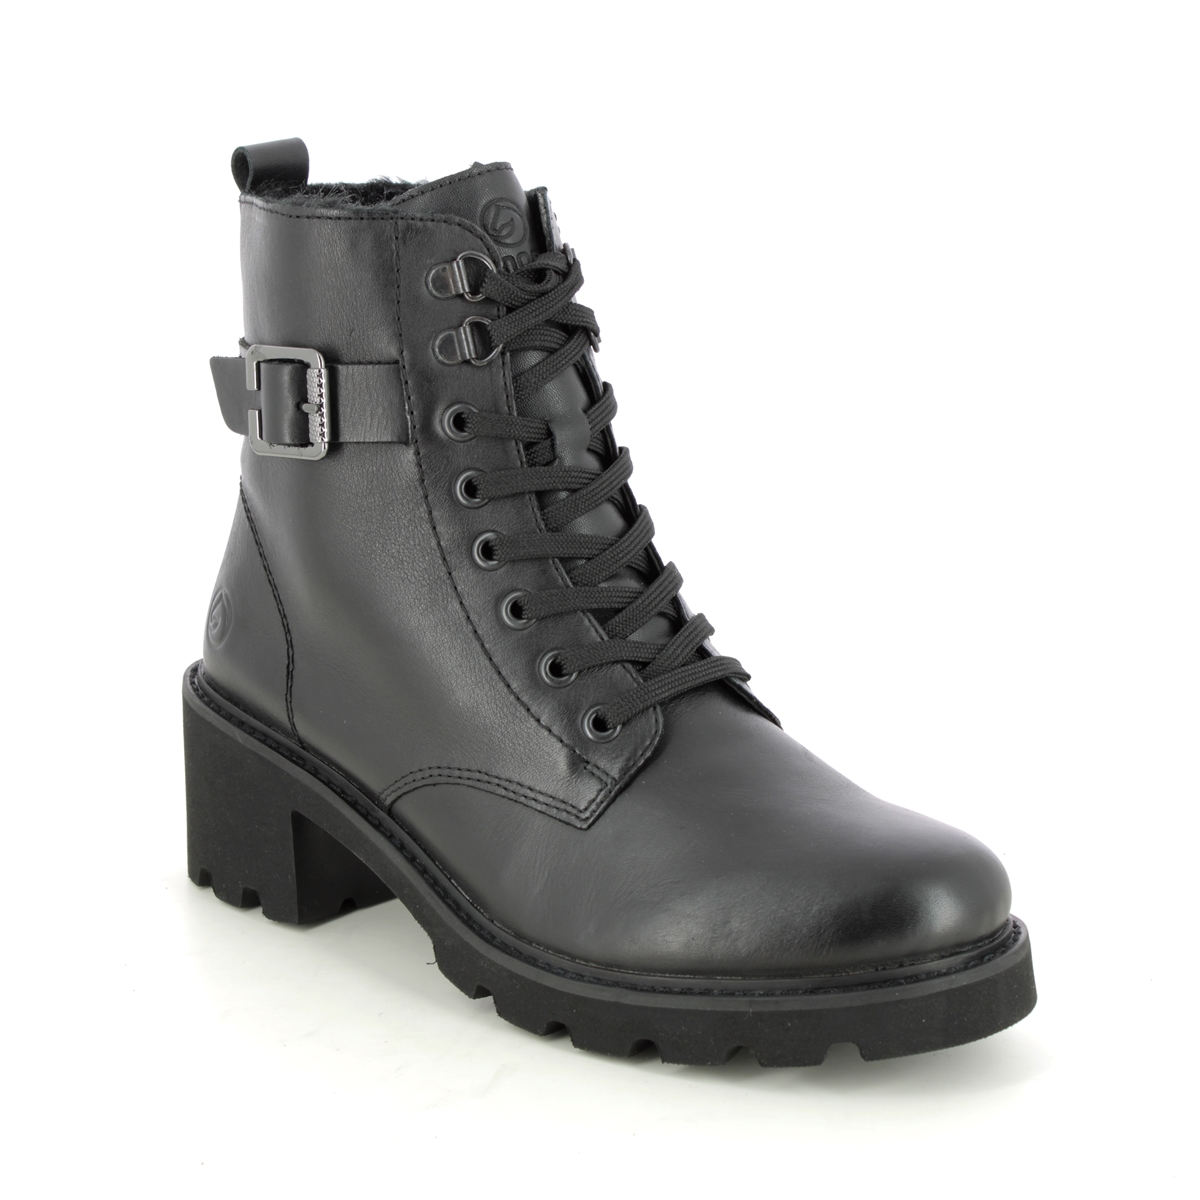 Remonte Bodola Black Leather Womens Lace Up Boots D0A74-01 In Size 39 In Plain Black Leather